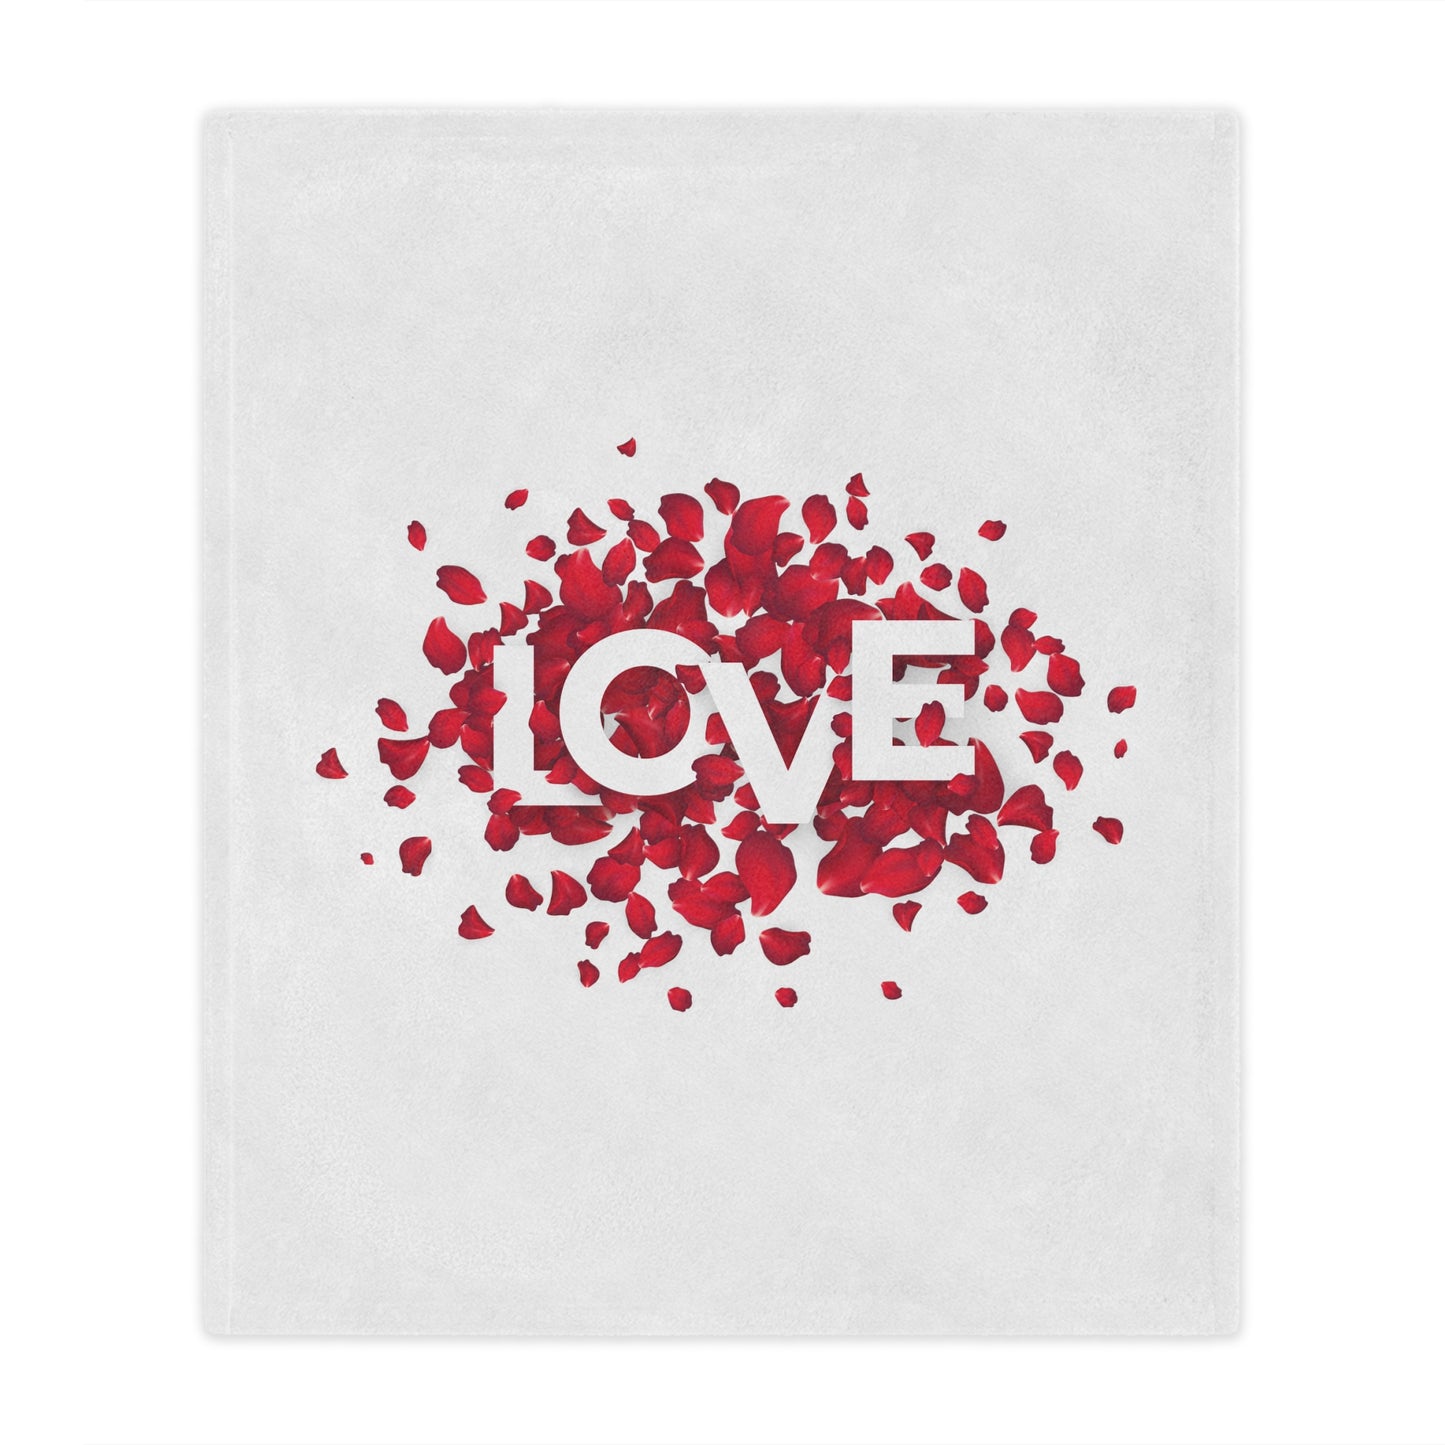 Love with Heart made of Flower Printed Valentine Minky Blanket, White & Red